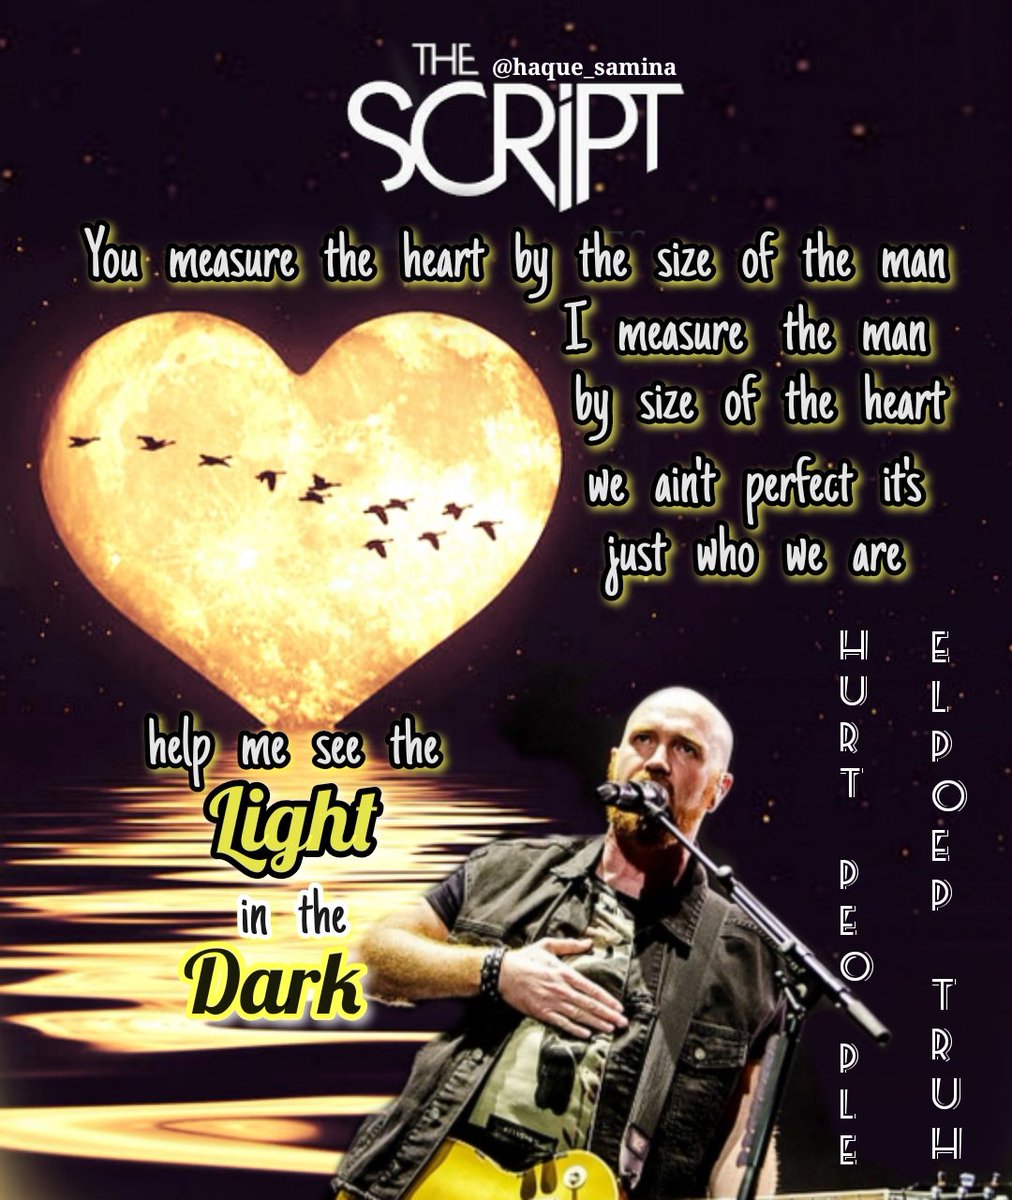 4 weeks on and it still feels like yesterday can't believe it 😭💔 what a big heart you had @thescript Mark missed and loved always! #HurtPeopleHurtPeople #MarkSheehan sending love to you guys @TheScript_Danny @glenofthepower and all Marks family and friends ❤️ 💙 ♥️